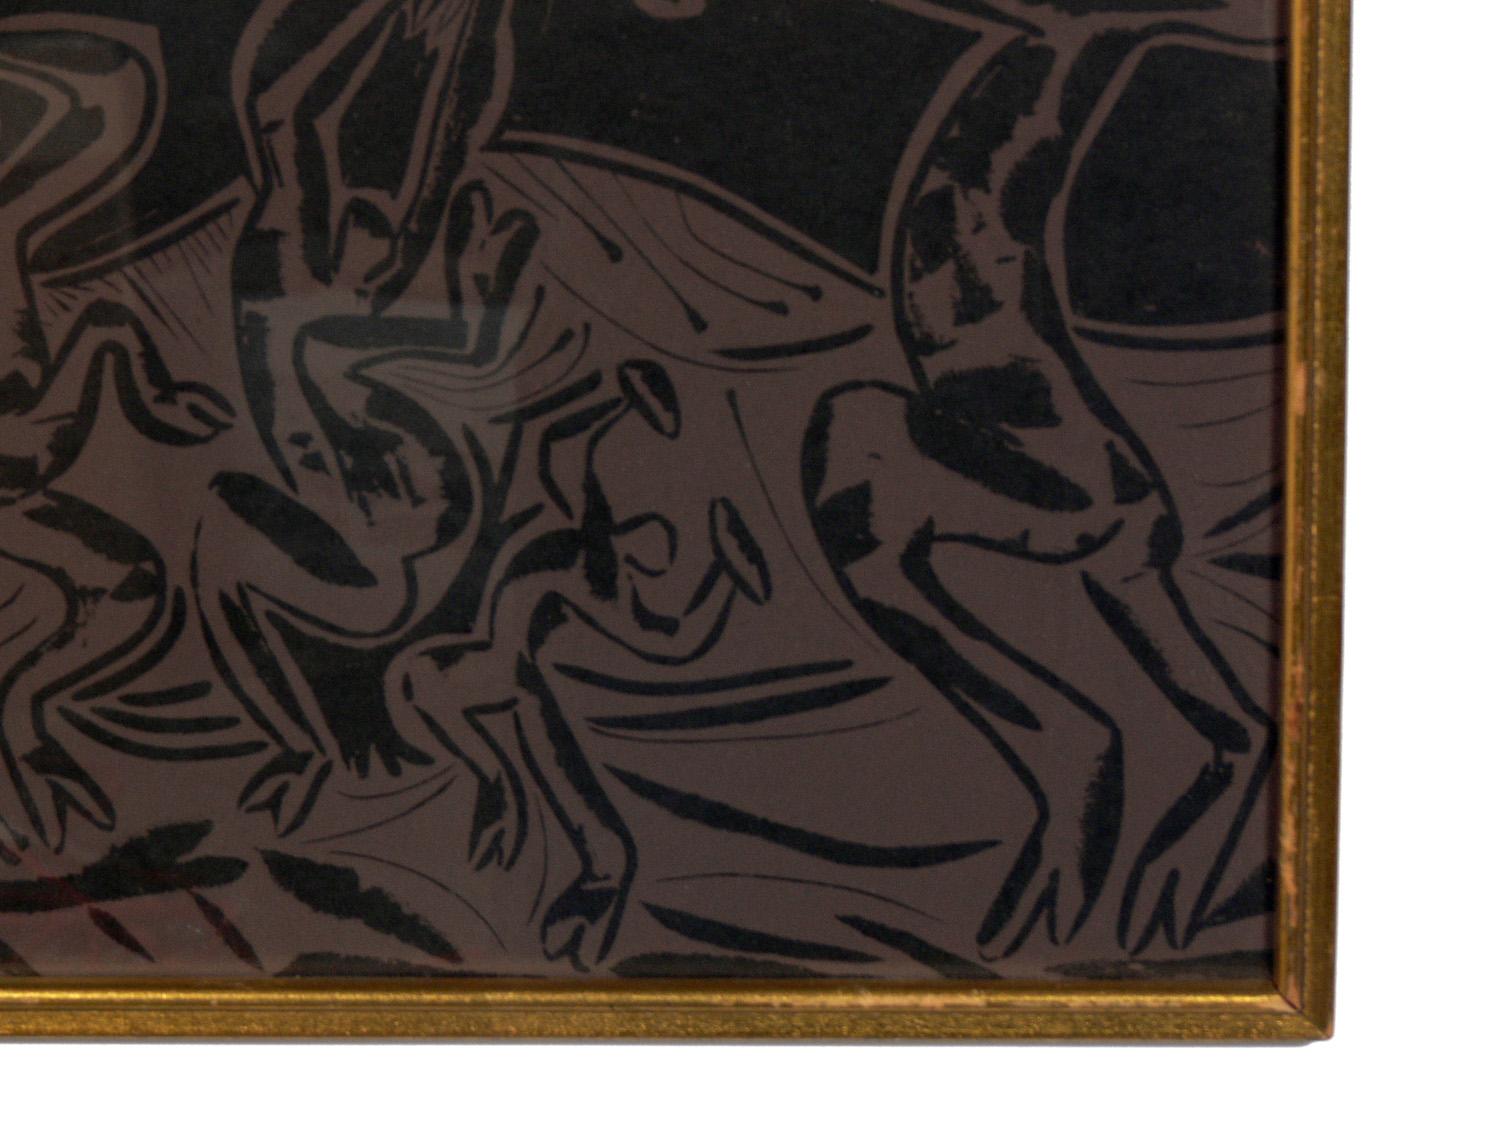 American Selection of Pablo Picasso Linocuts